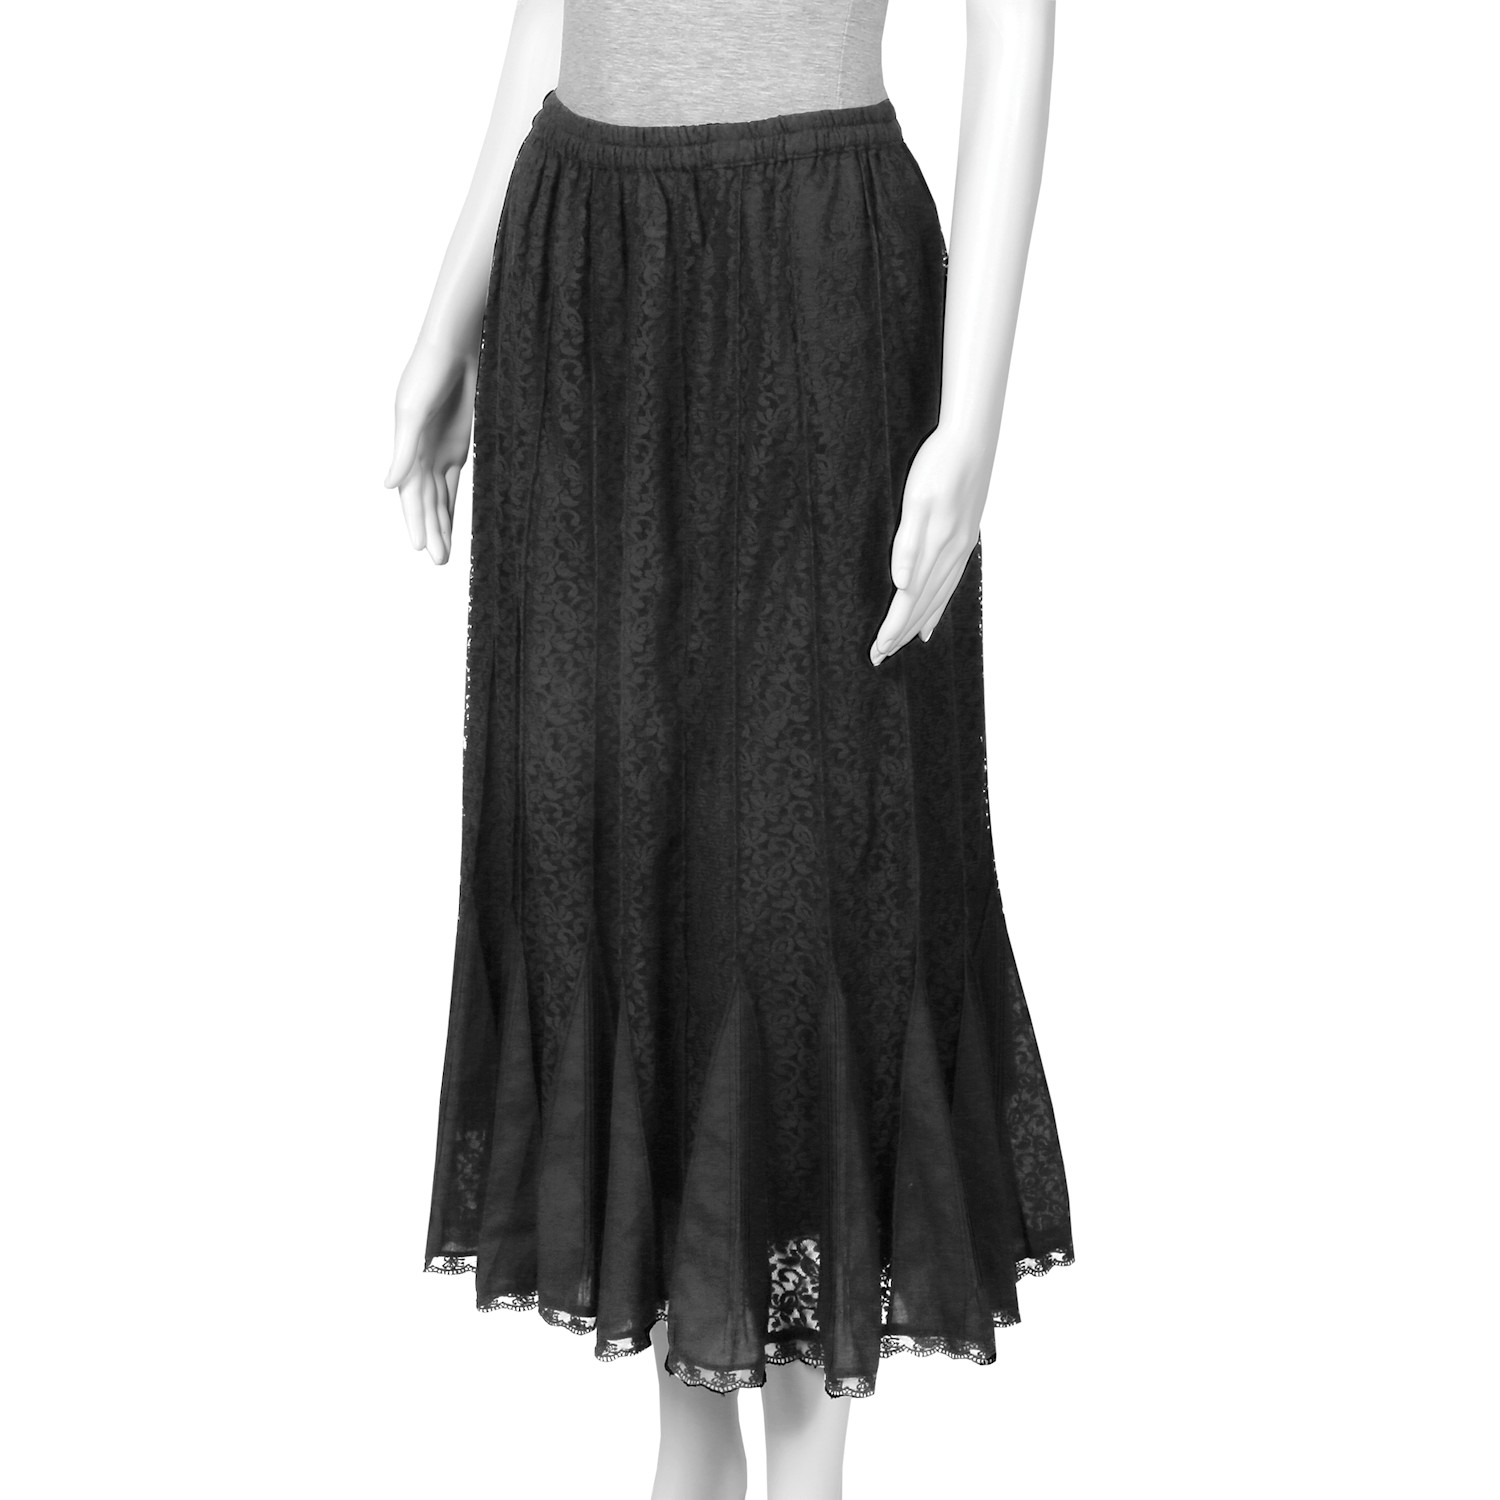 Women's Black Lace Gored Skirt - Fully Lined | Signals | TA4602